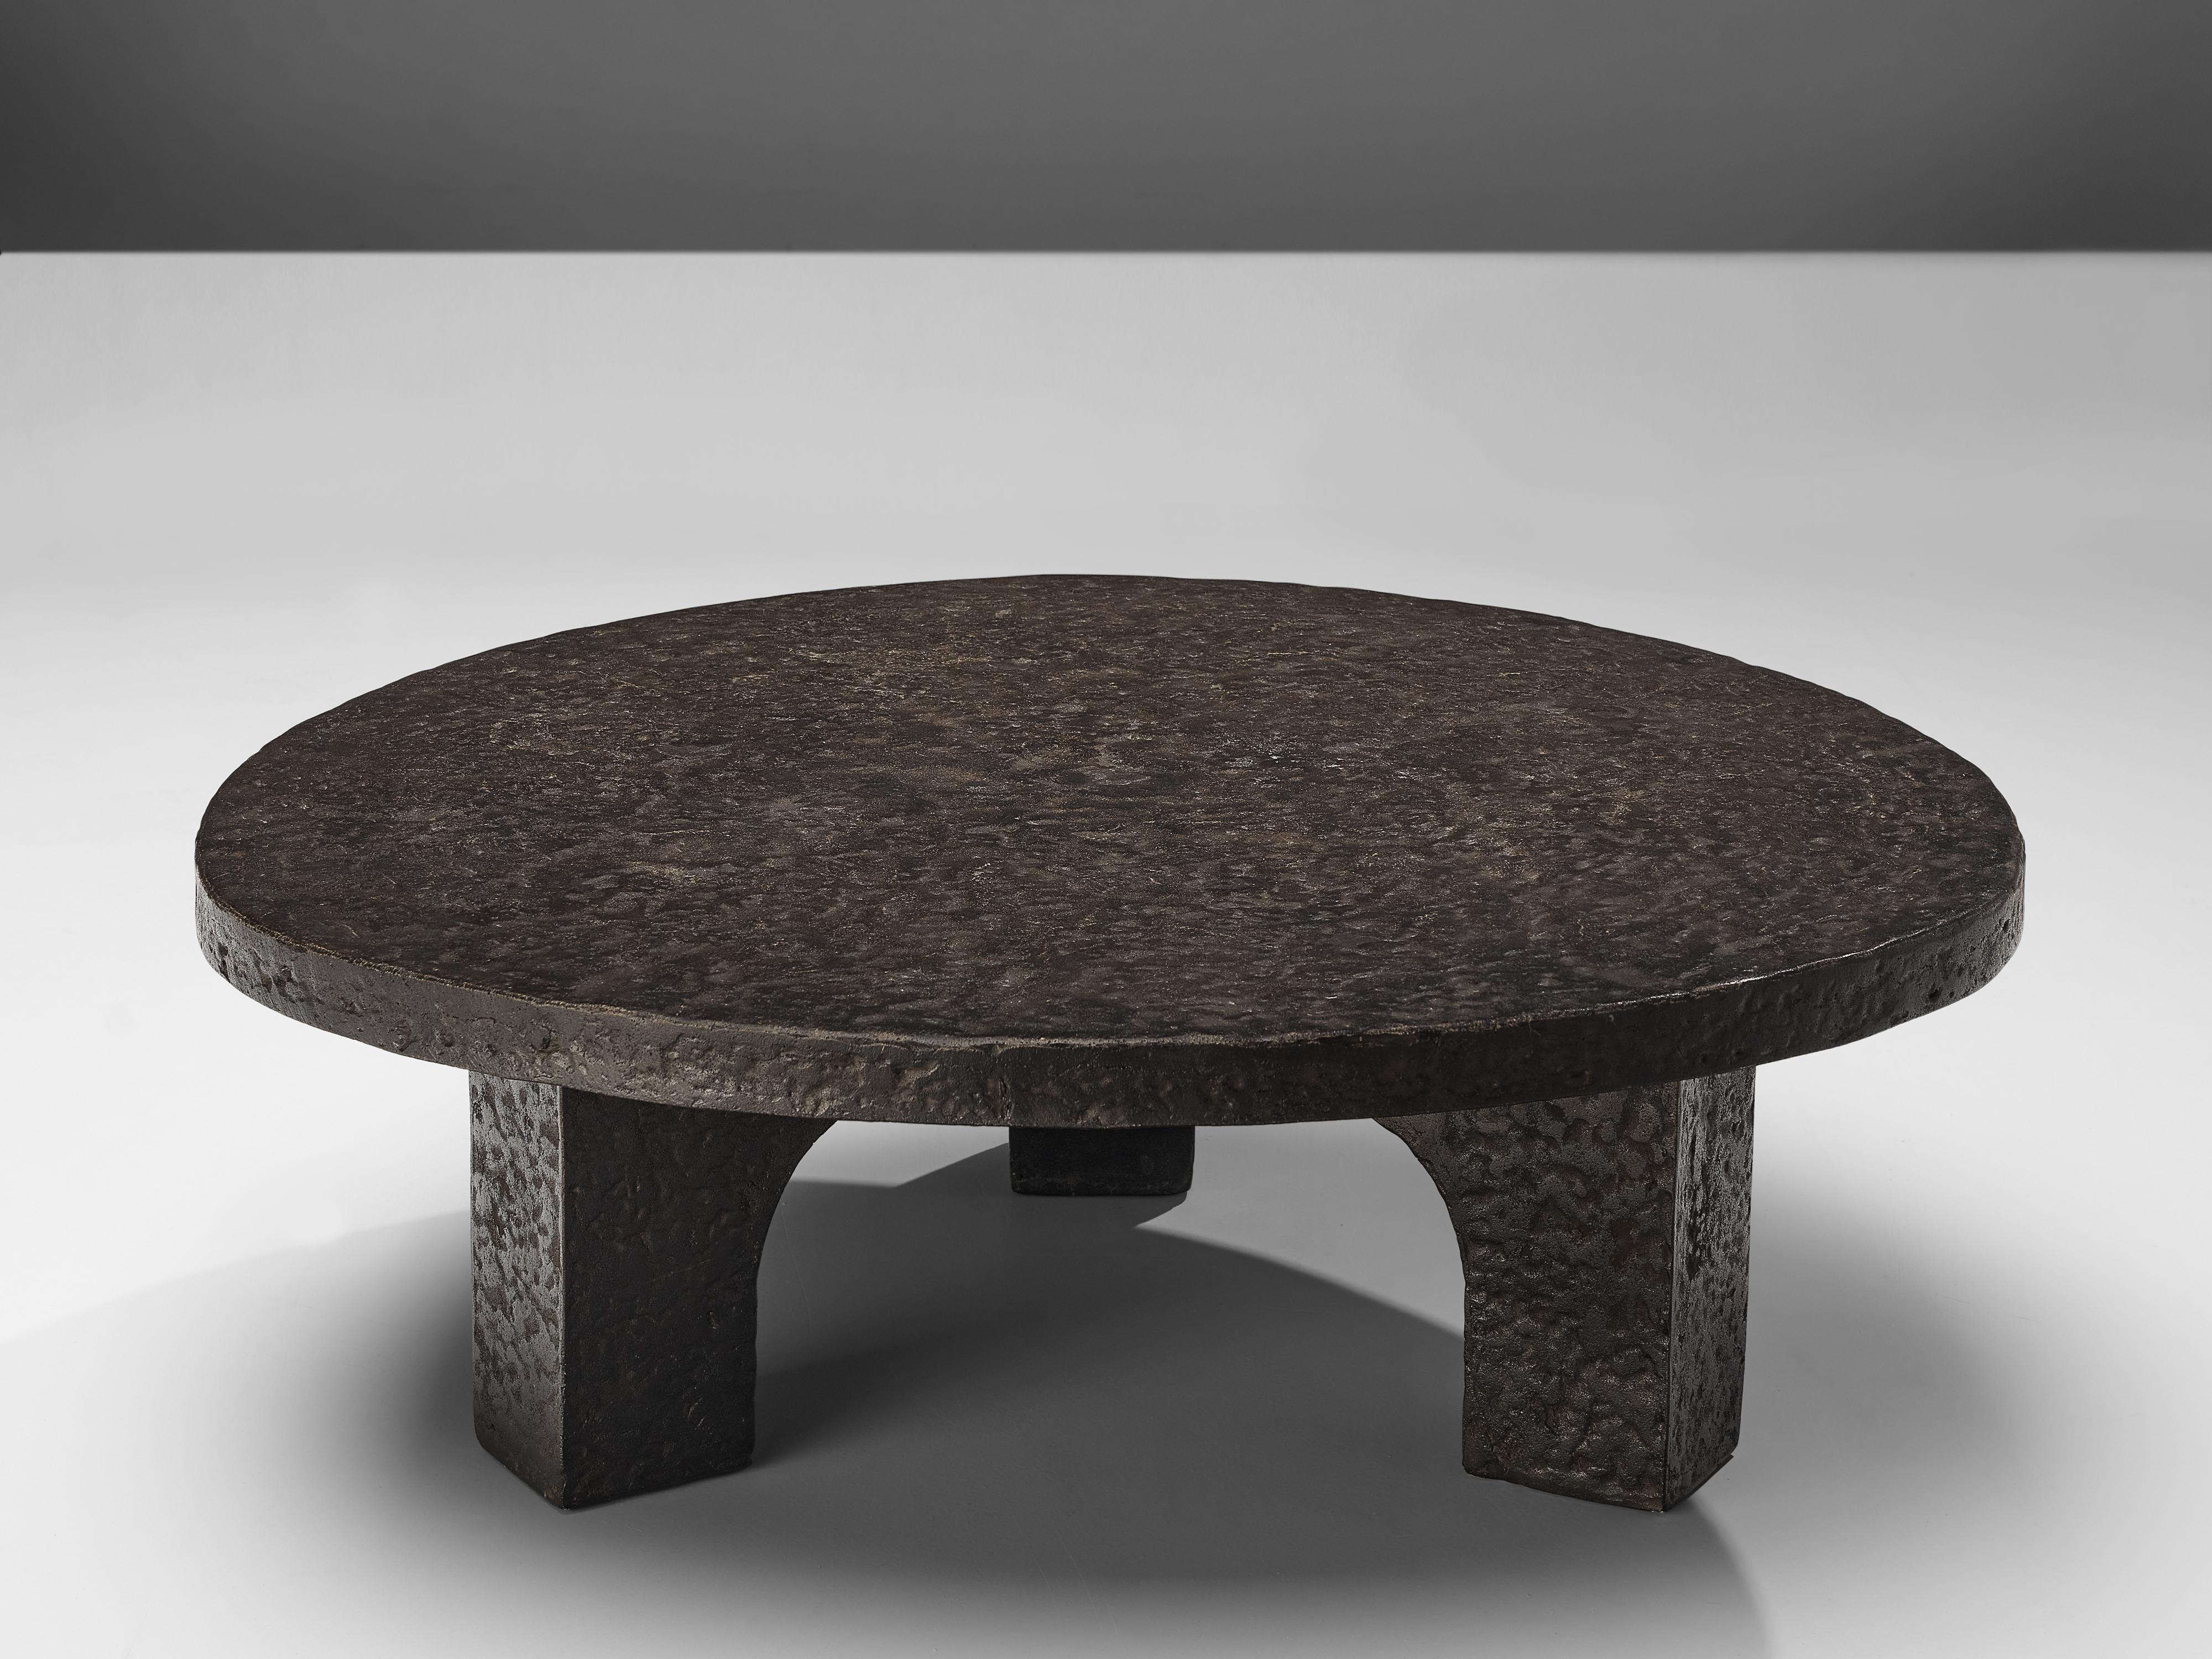 Coffee table, resin, Northern-Europe, 1970s

This deep black to brown coffee or cocktail table was made in the 1970s. The thick round top is supported by three arched legs that contribute to the sturdy, architectural appearance. This low table is